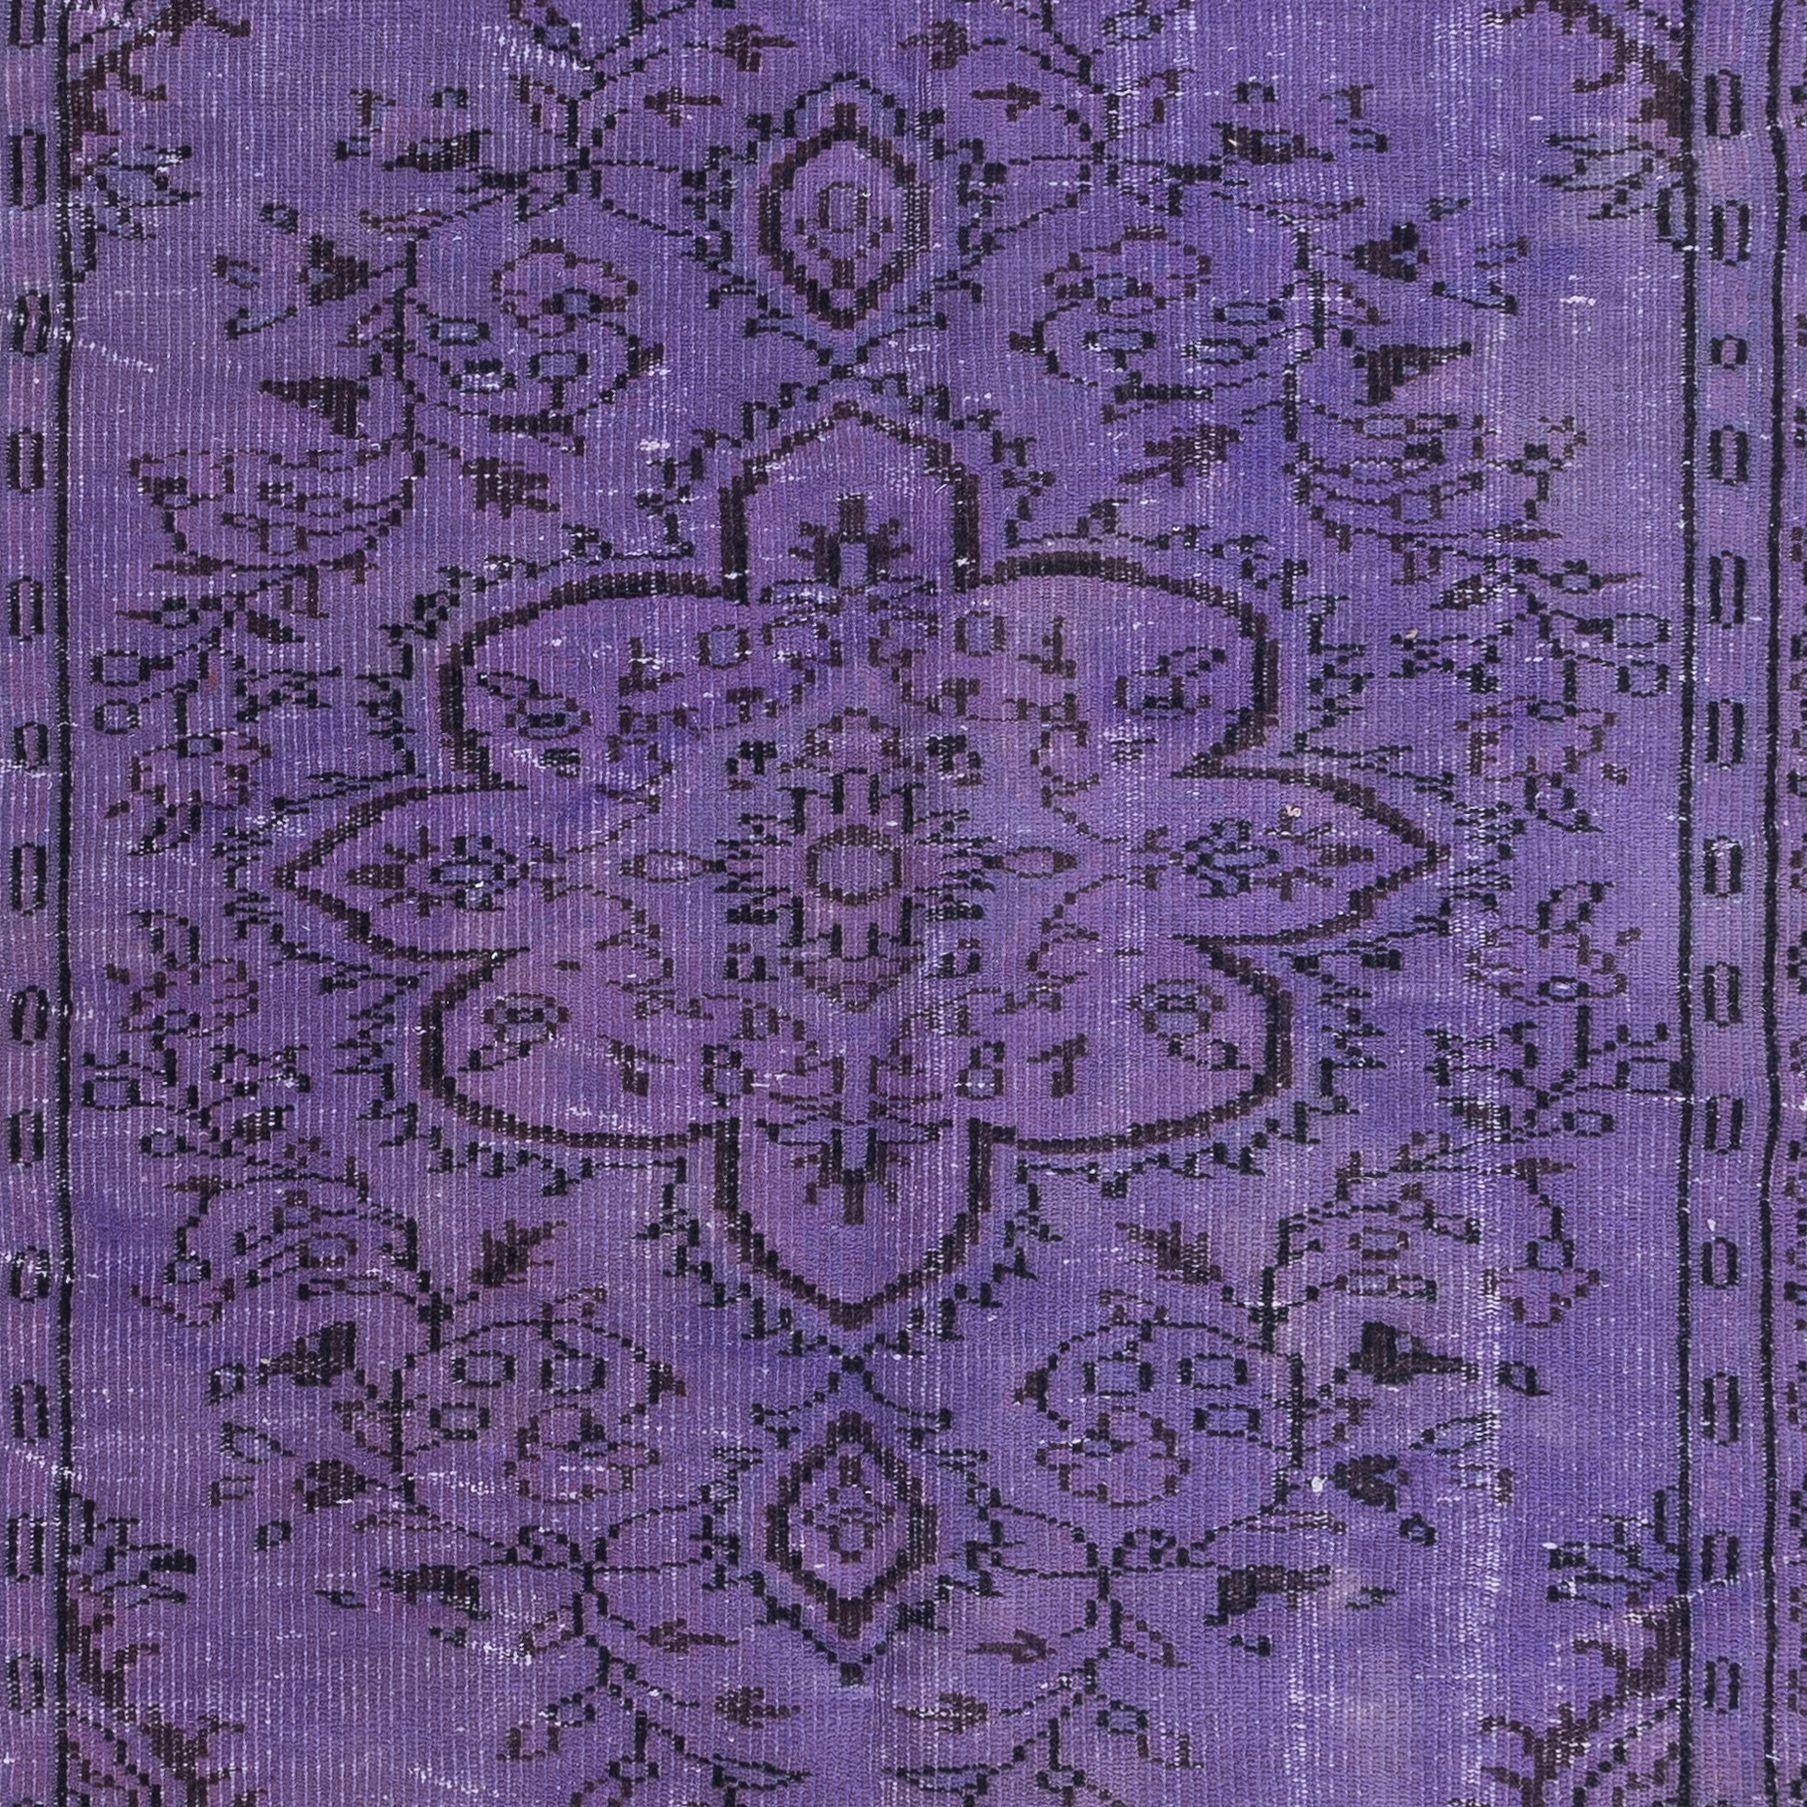 Modern 4.6x7.7 Ft Rustic Turkish Floral Pattern Area Rug. Twitch Purple Handmade Carpet For Sale